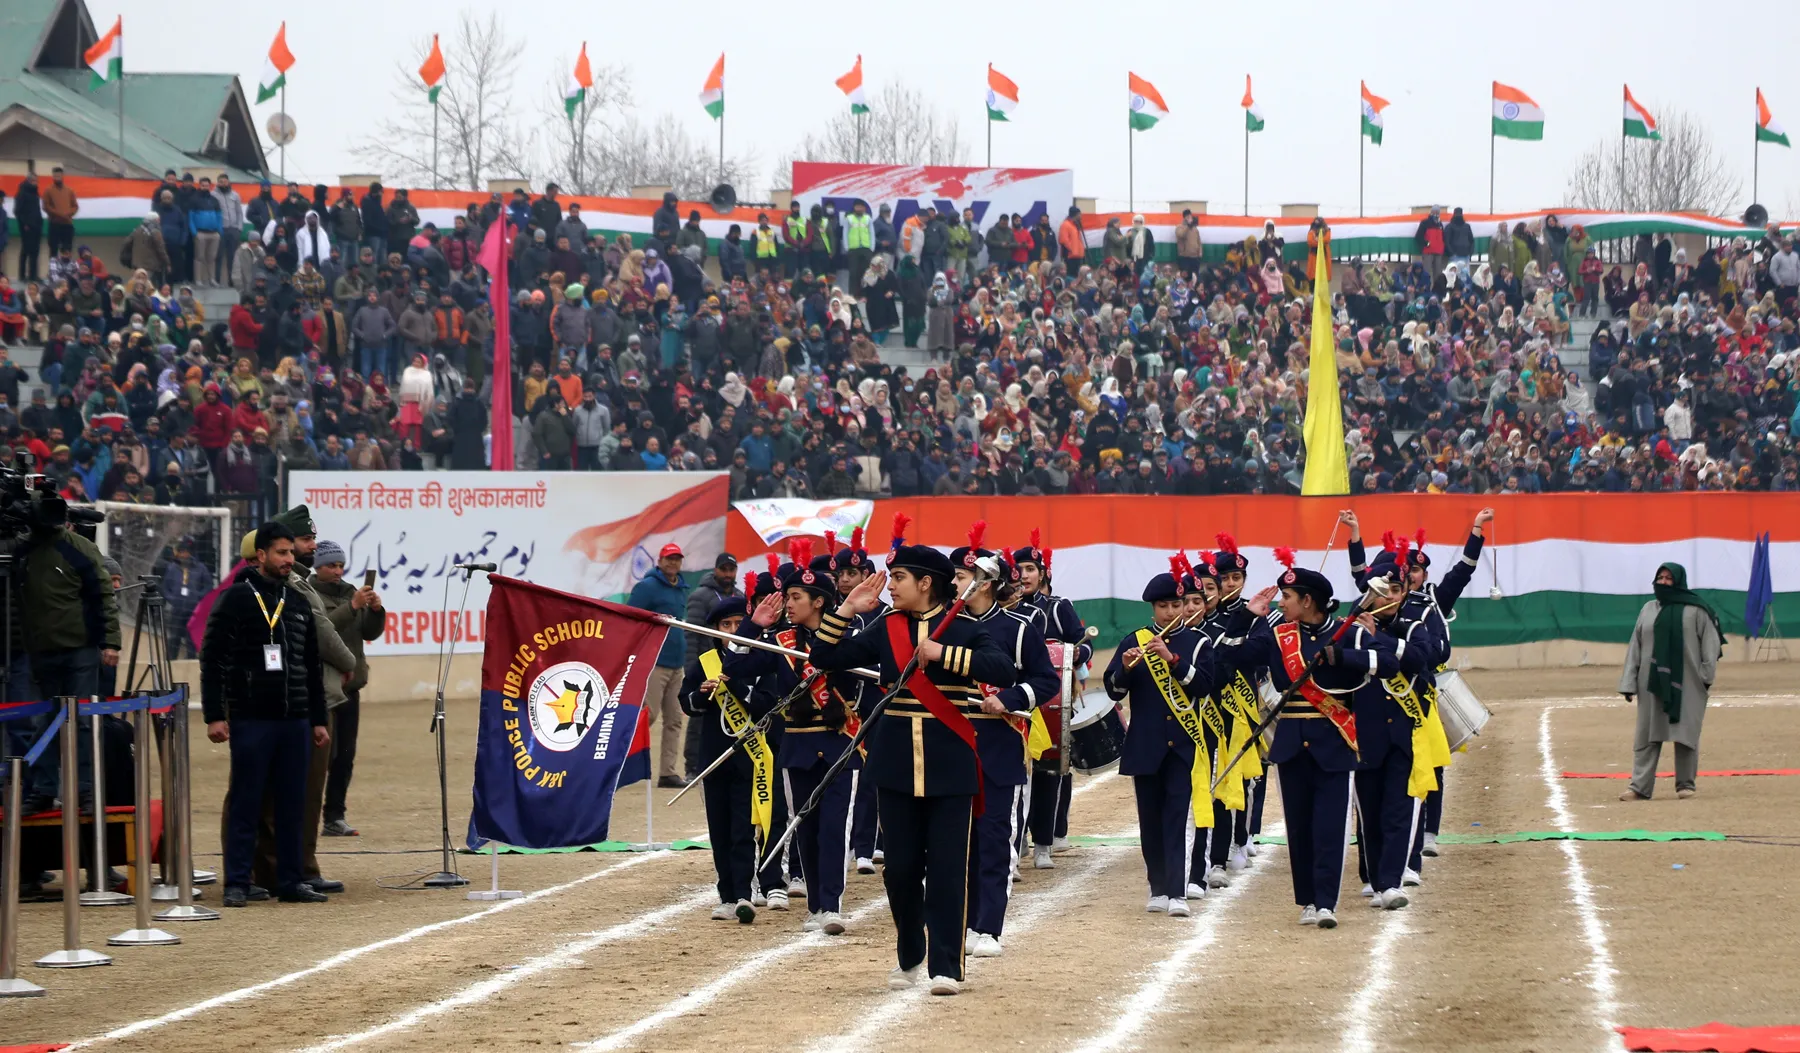 The students of J&K Police Public School take part in the march past during the Republic Day function at Bakshi stadium in Srinagar on Friday. Mubashir Khan for Greater Kashmir